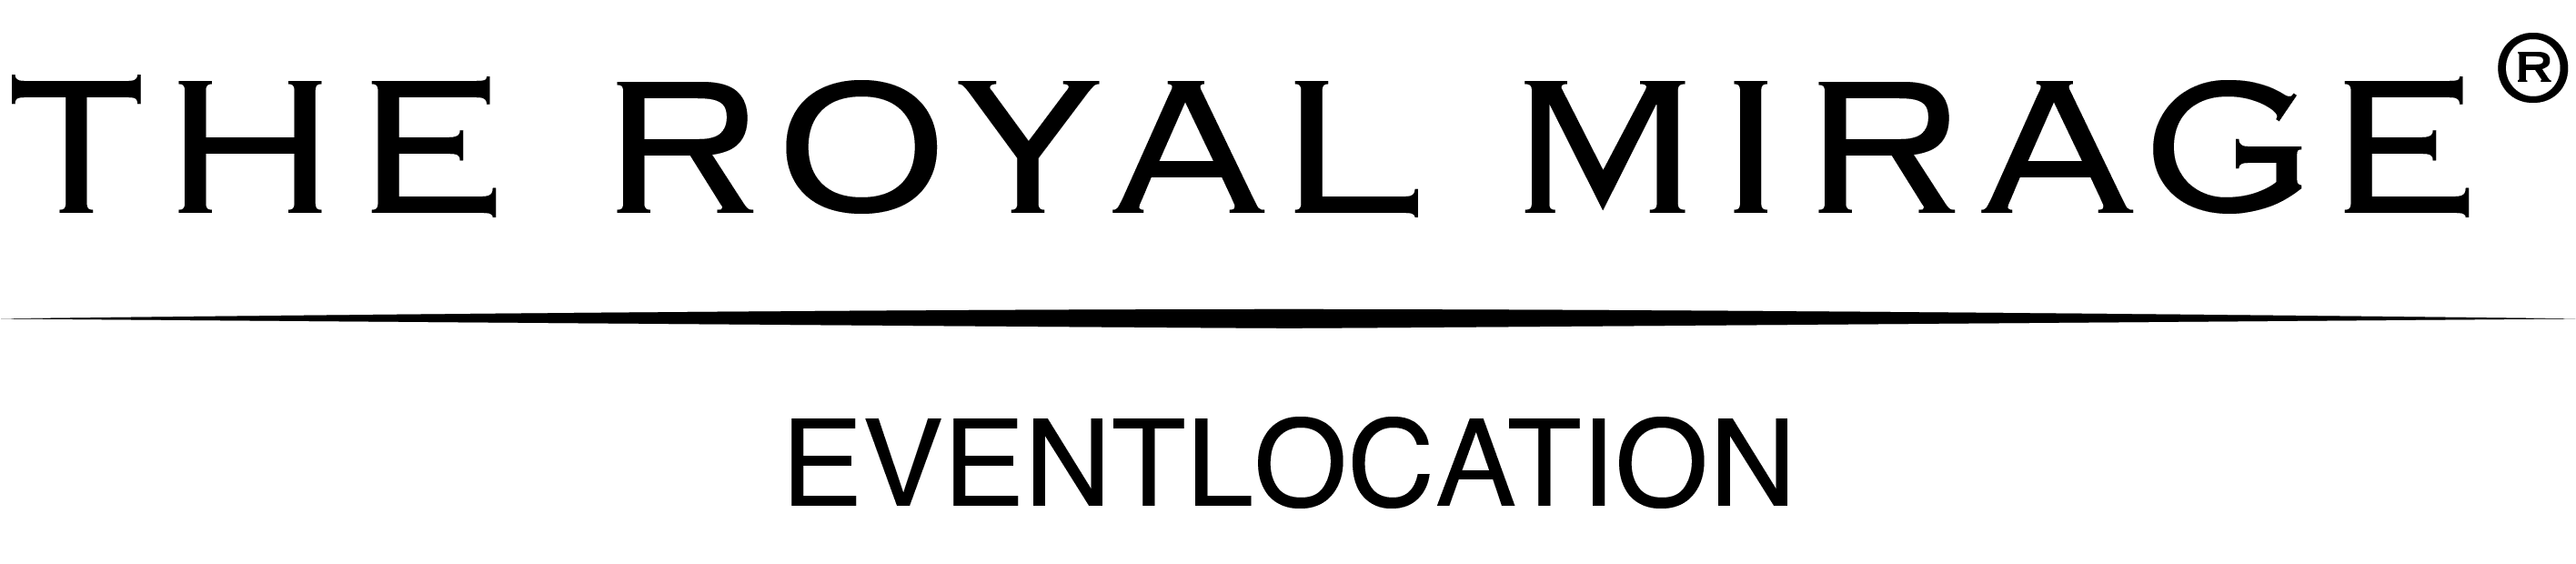 The Royal Mirage® - Eventlocation